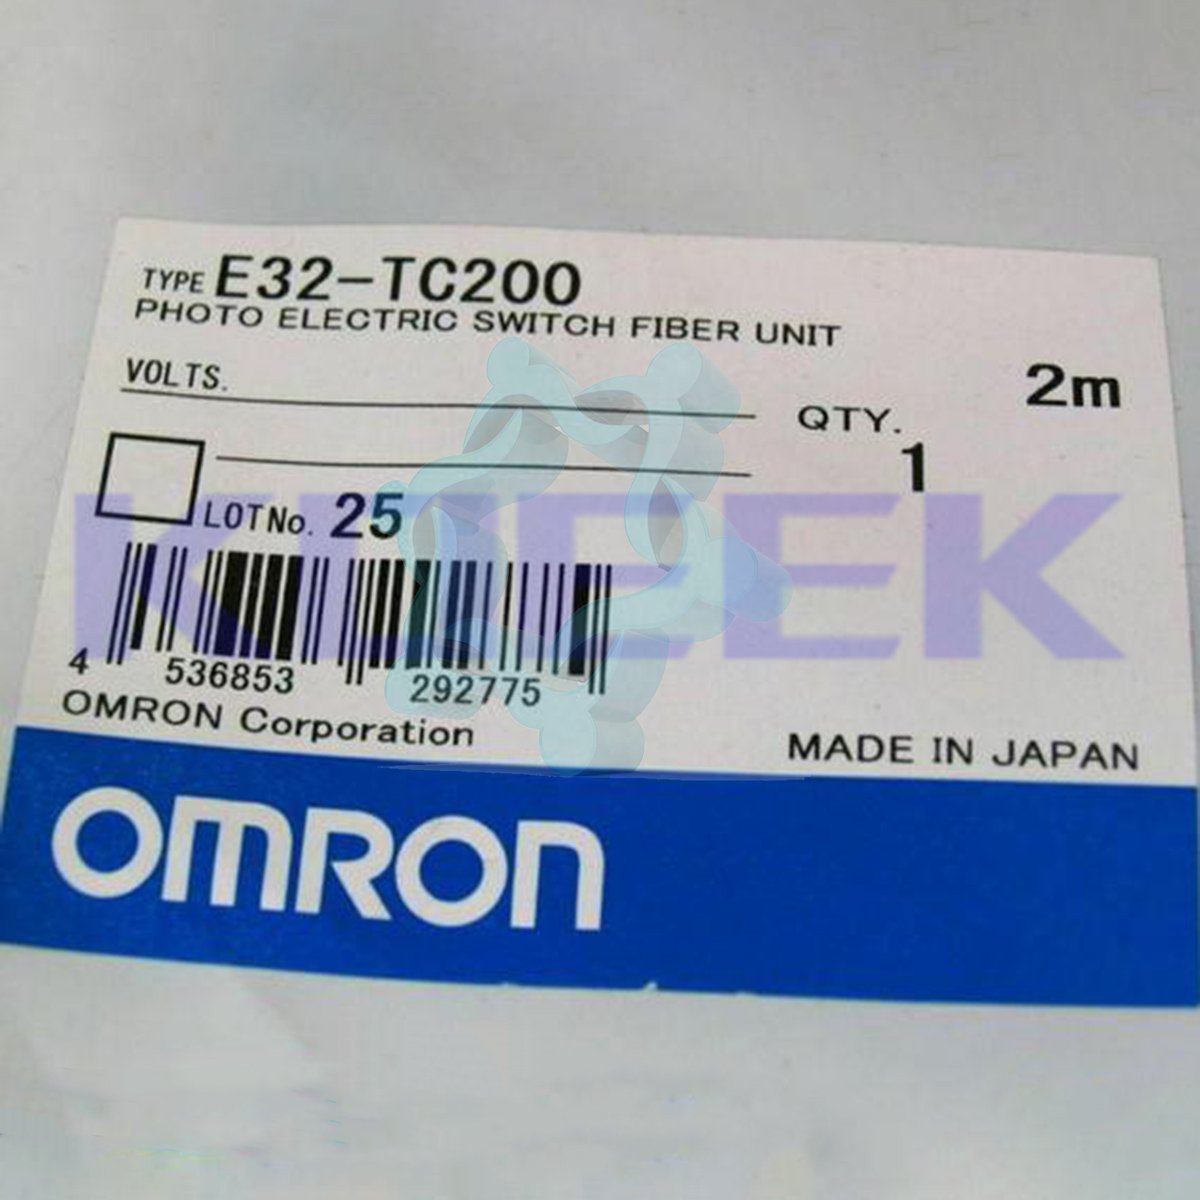 E32-TC200 KOEED 1, 80%, import_2020_10_10_031751, Omron, Other